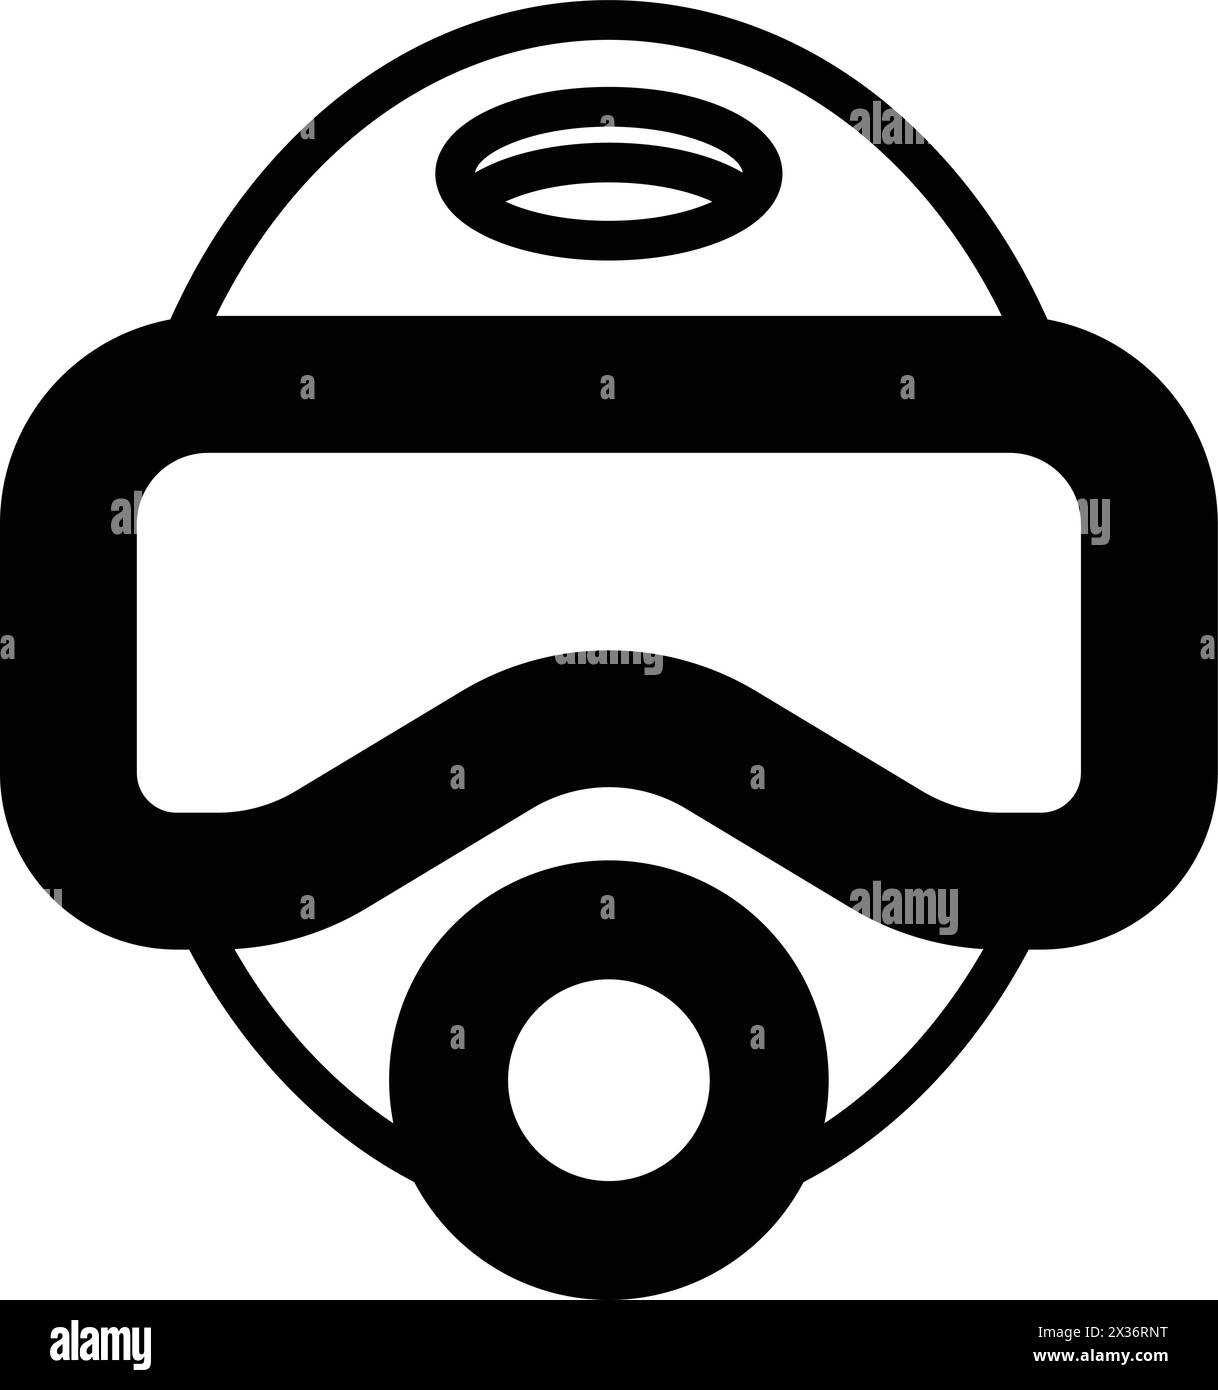 A black and white image of a diving mask with a black hose attached to it. The mask is designed to protect the wearer from water and other hazards whi Stock Vector